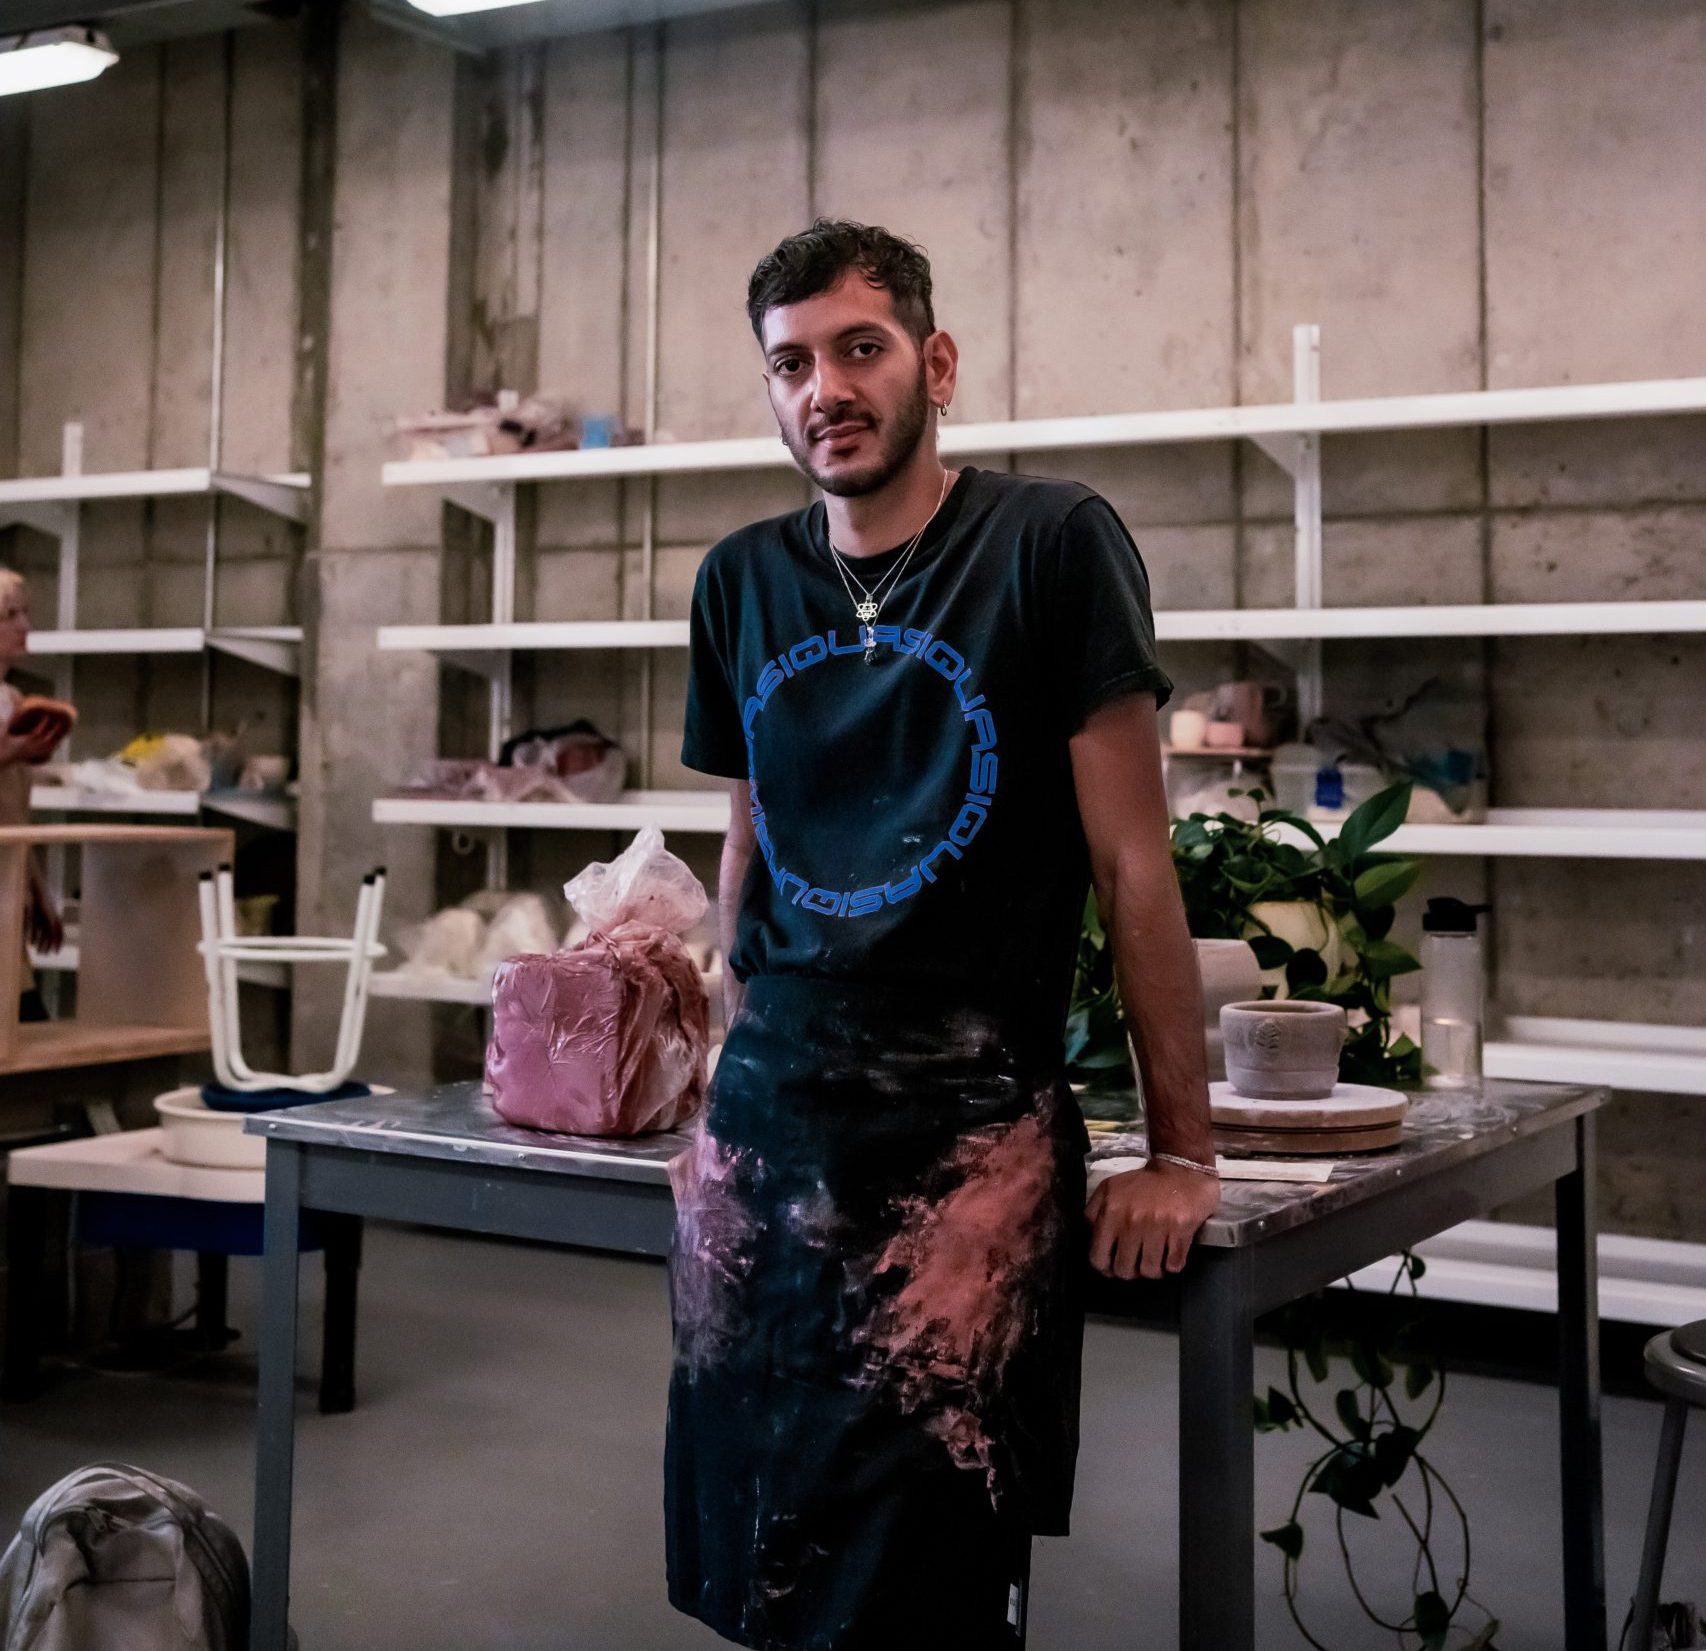 A photo of Jordany in an art studio leaning on a table